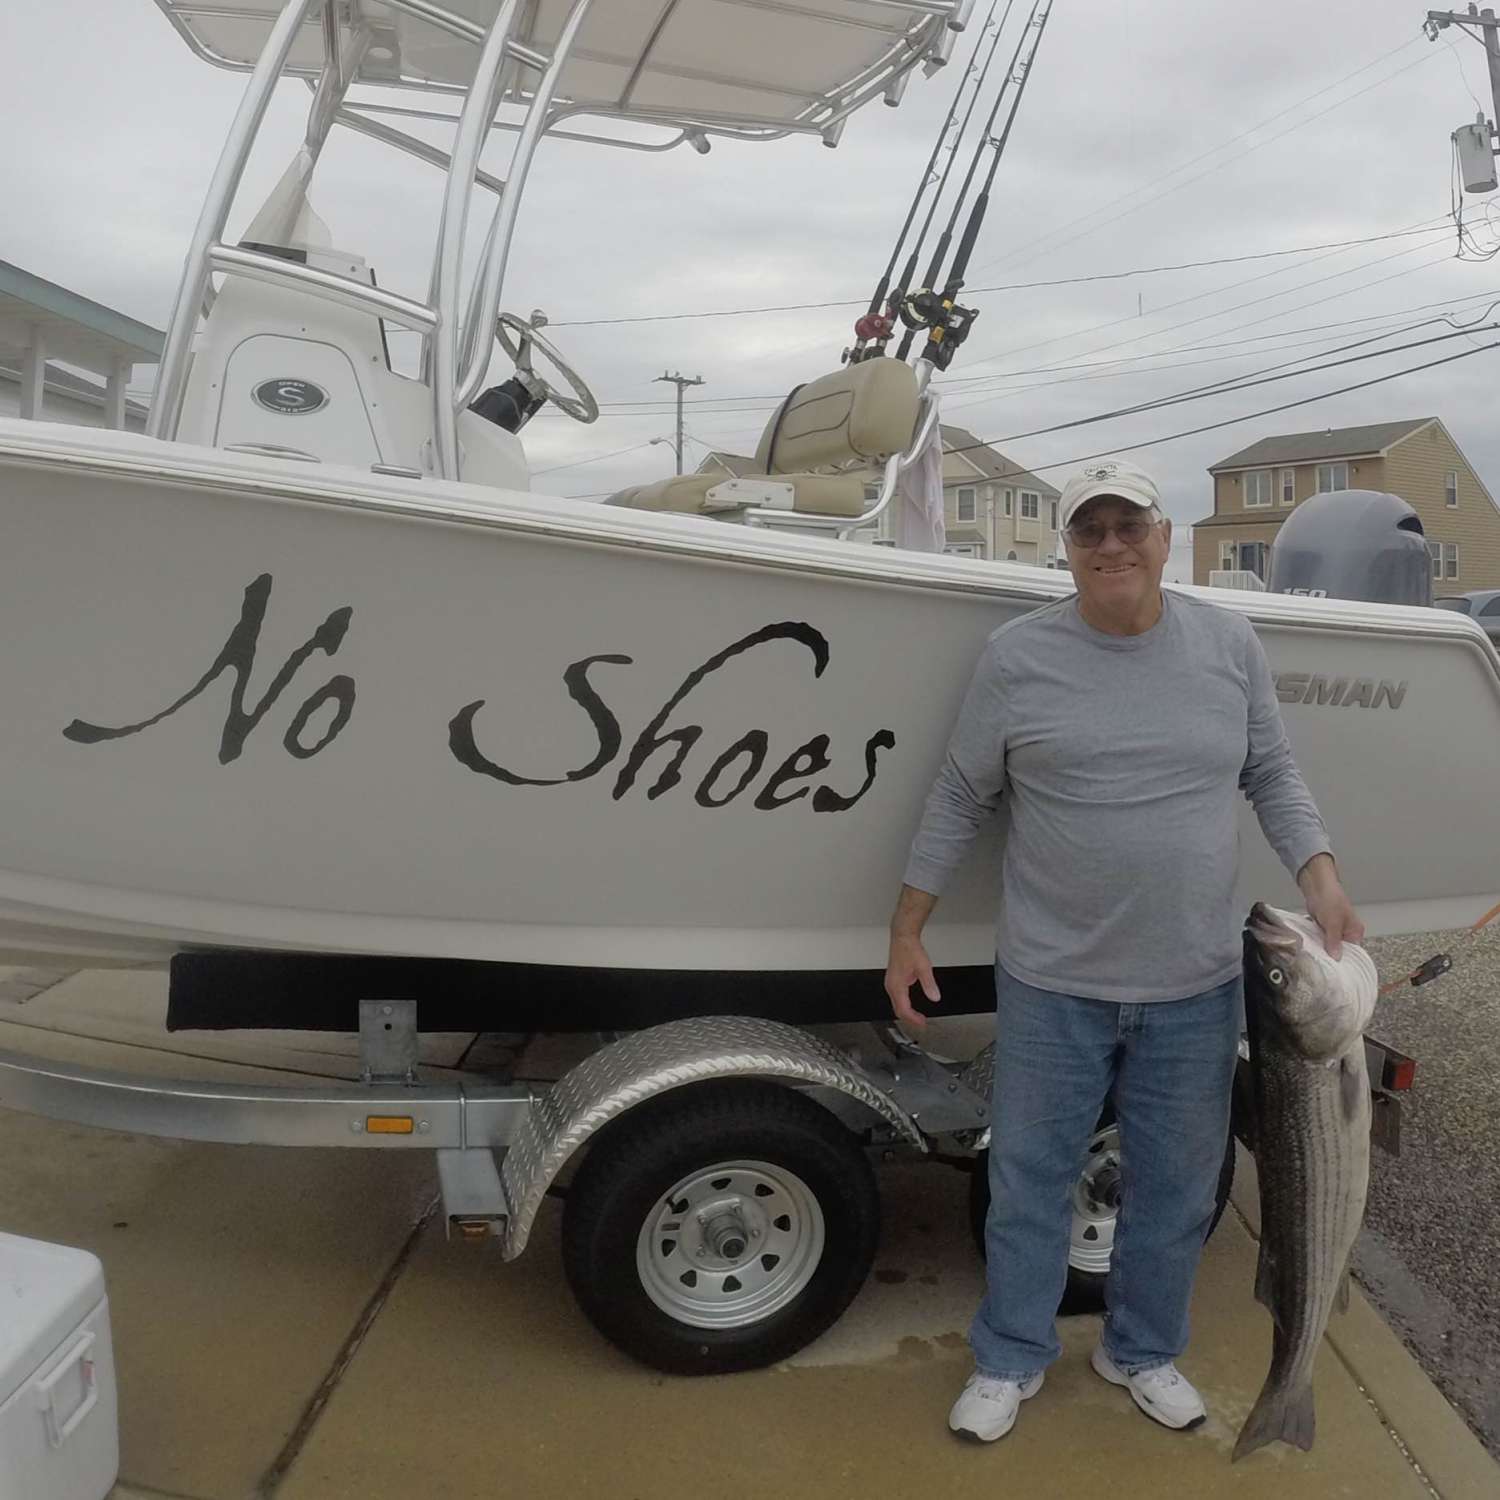 my photo was taken in Brigantine NJ after a great day fishing for stripers in 4 to 5 foot seas...